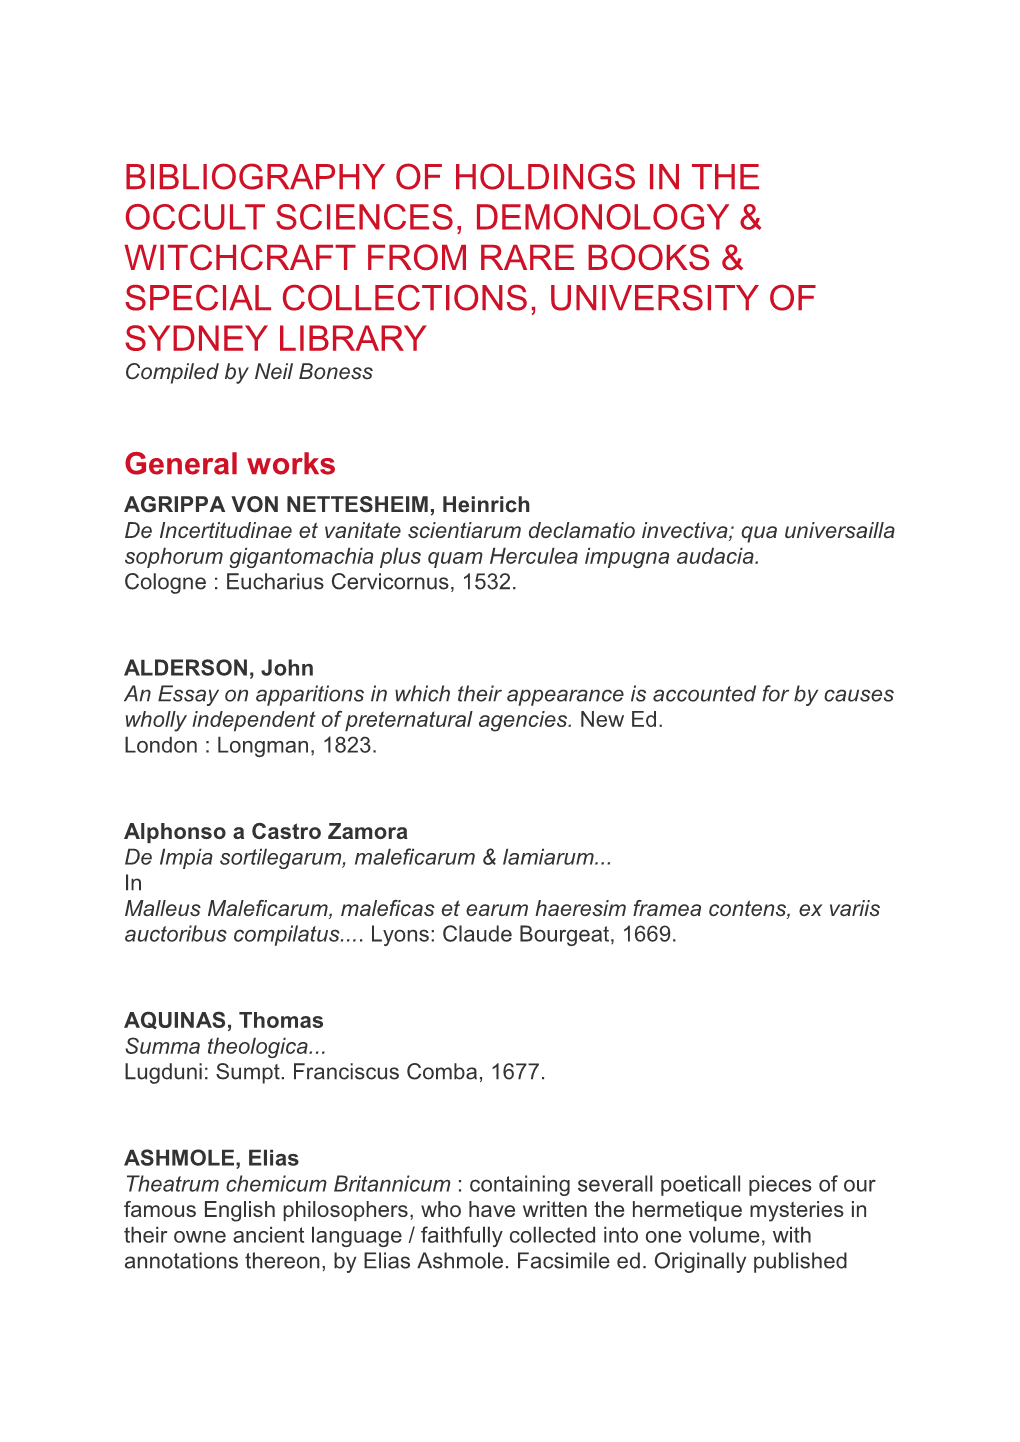 BIBLIOGRAPHY of HOLDINGS in the OCCULT SCIENCES, DEMONOLOGY & WITCHCRAFT from RARE BOOKS & SPECIAL COLLECTIONS, UNIVERSITY of SYDNEY LIBRARY Compiled by Neil Boness